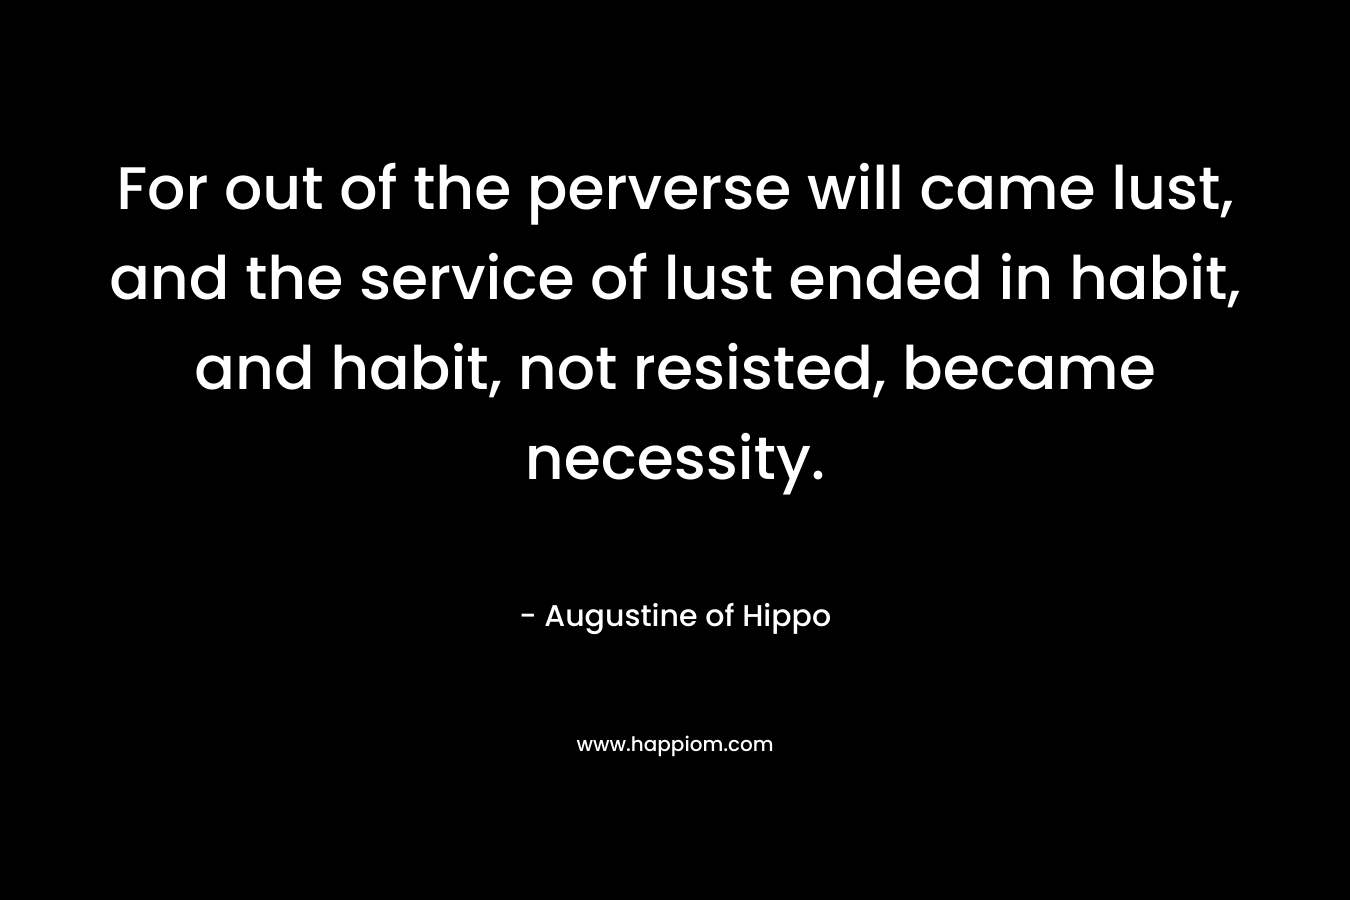 For out of the perverse will came lust, and the service of lust ended in habit, and habit, not resisted, became necessity.